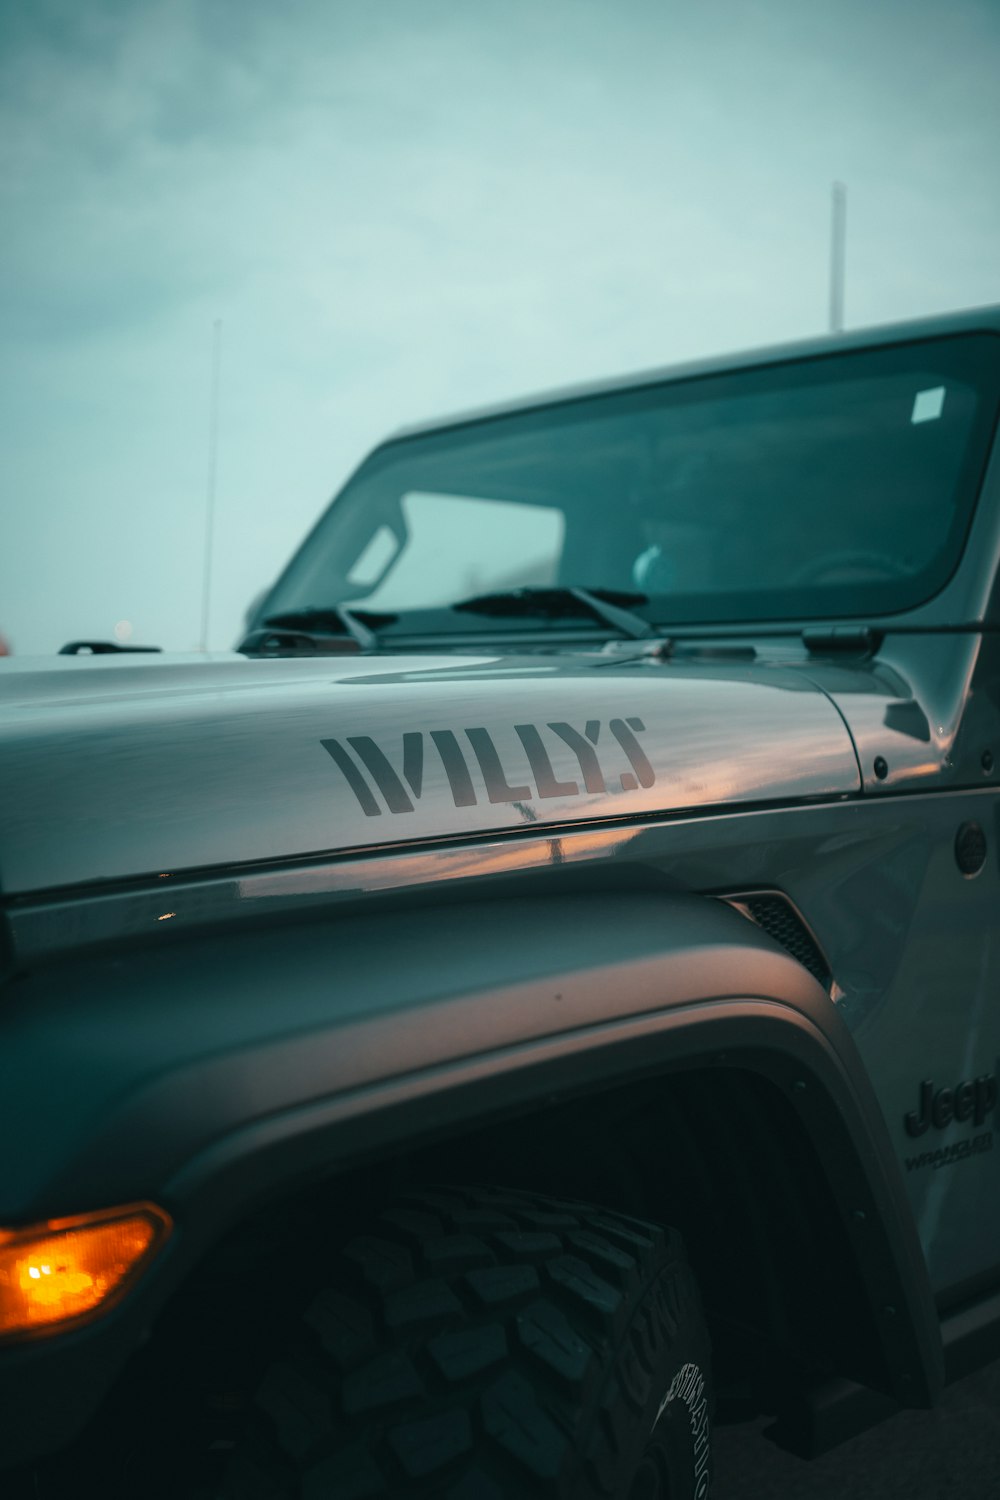 a close up of a jeep with the word wild's on it